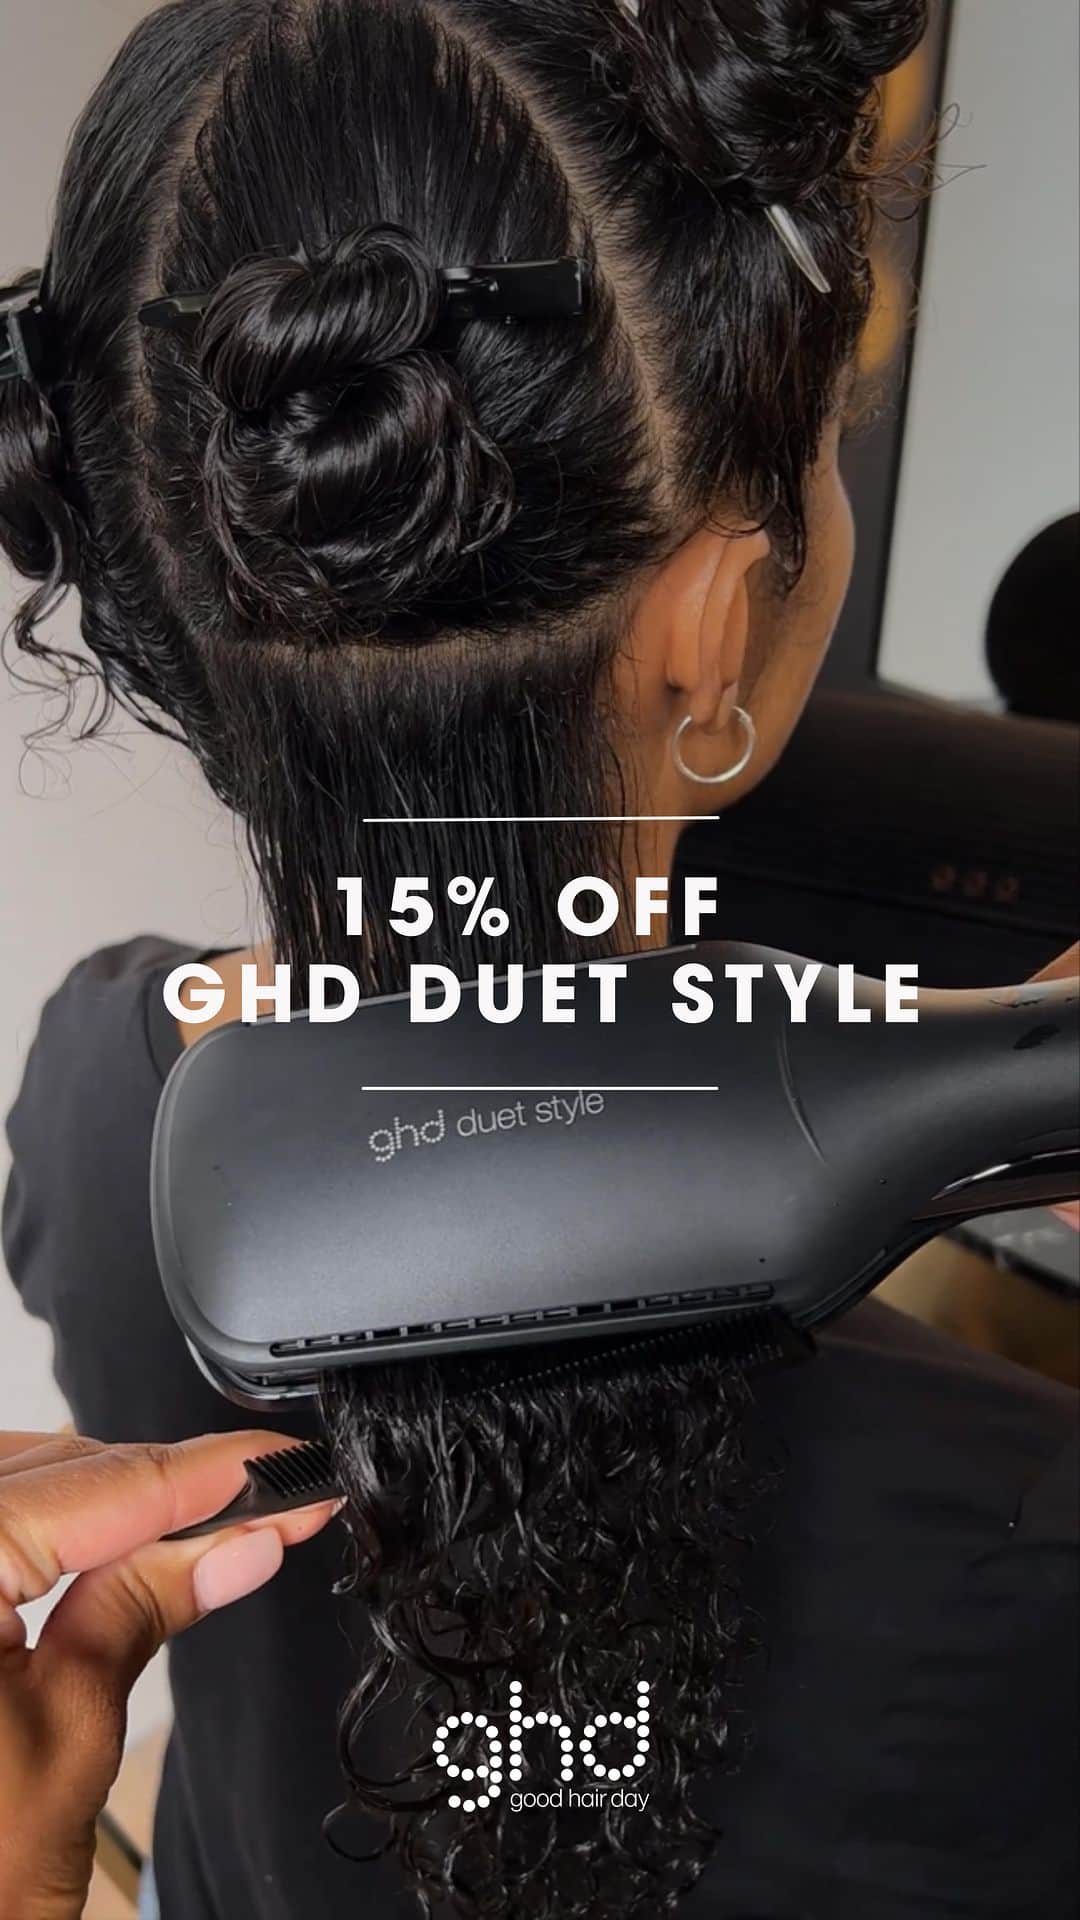 ghd hairのインスタグラム：「Psssst! The secrets out, duet style is 15% OFF for the first time EVER (for a limited time only!)😮💰  Receive a complimentary heat protect spray with every electrical purchase when using code GHDXBF at checkout this Black Friday 💰 (FYI: We have tool personalisation across selected tools too!) ✍️   #ghd #ghdhair #blackfriday #haircaredeals #blackfriday23 #blackfridayhaircare」